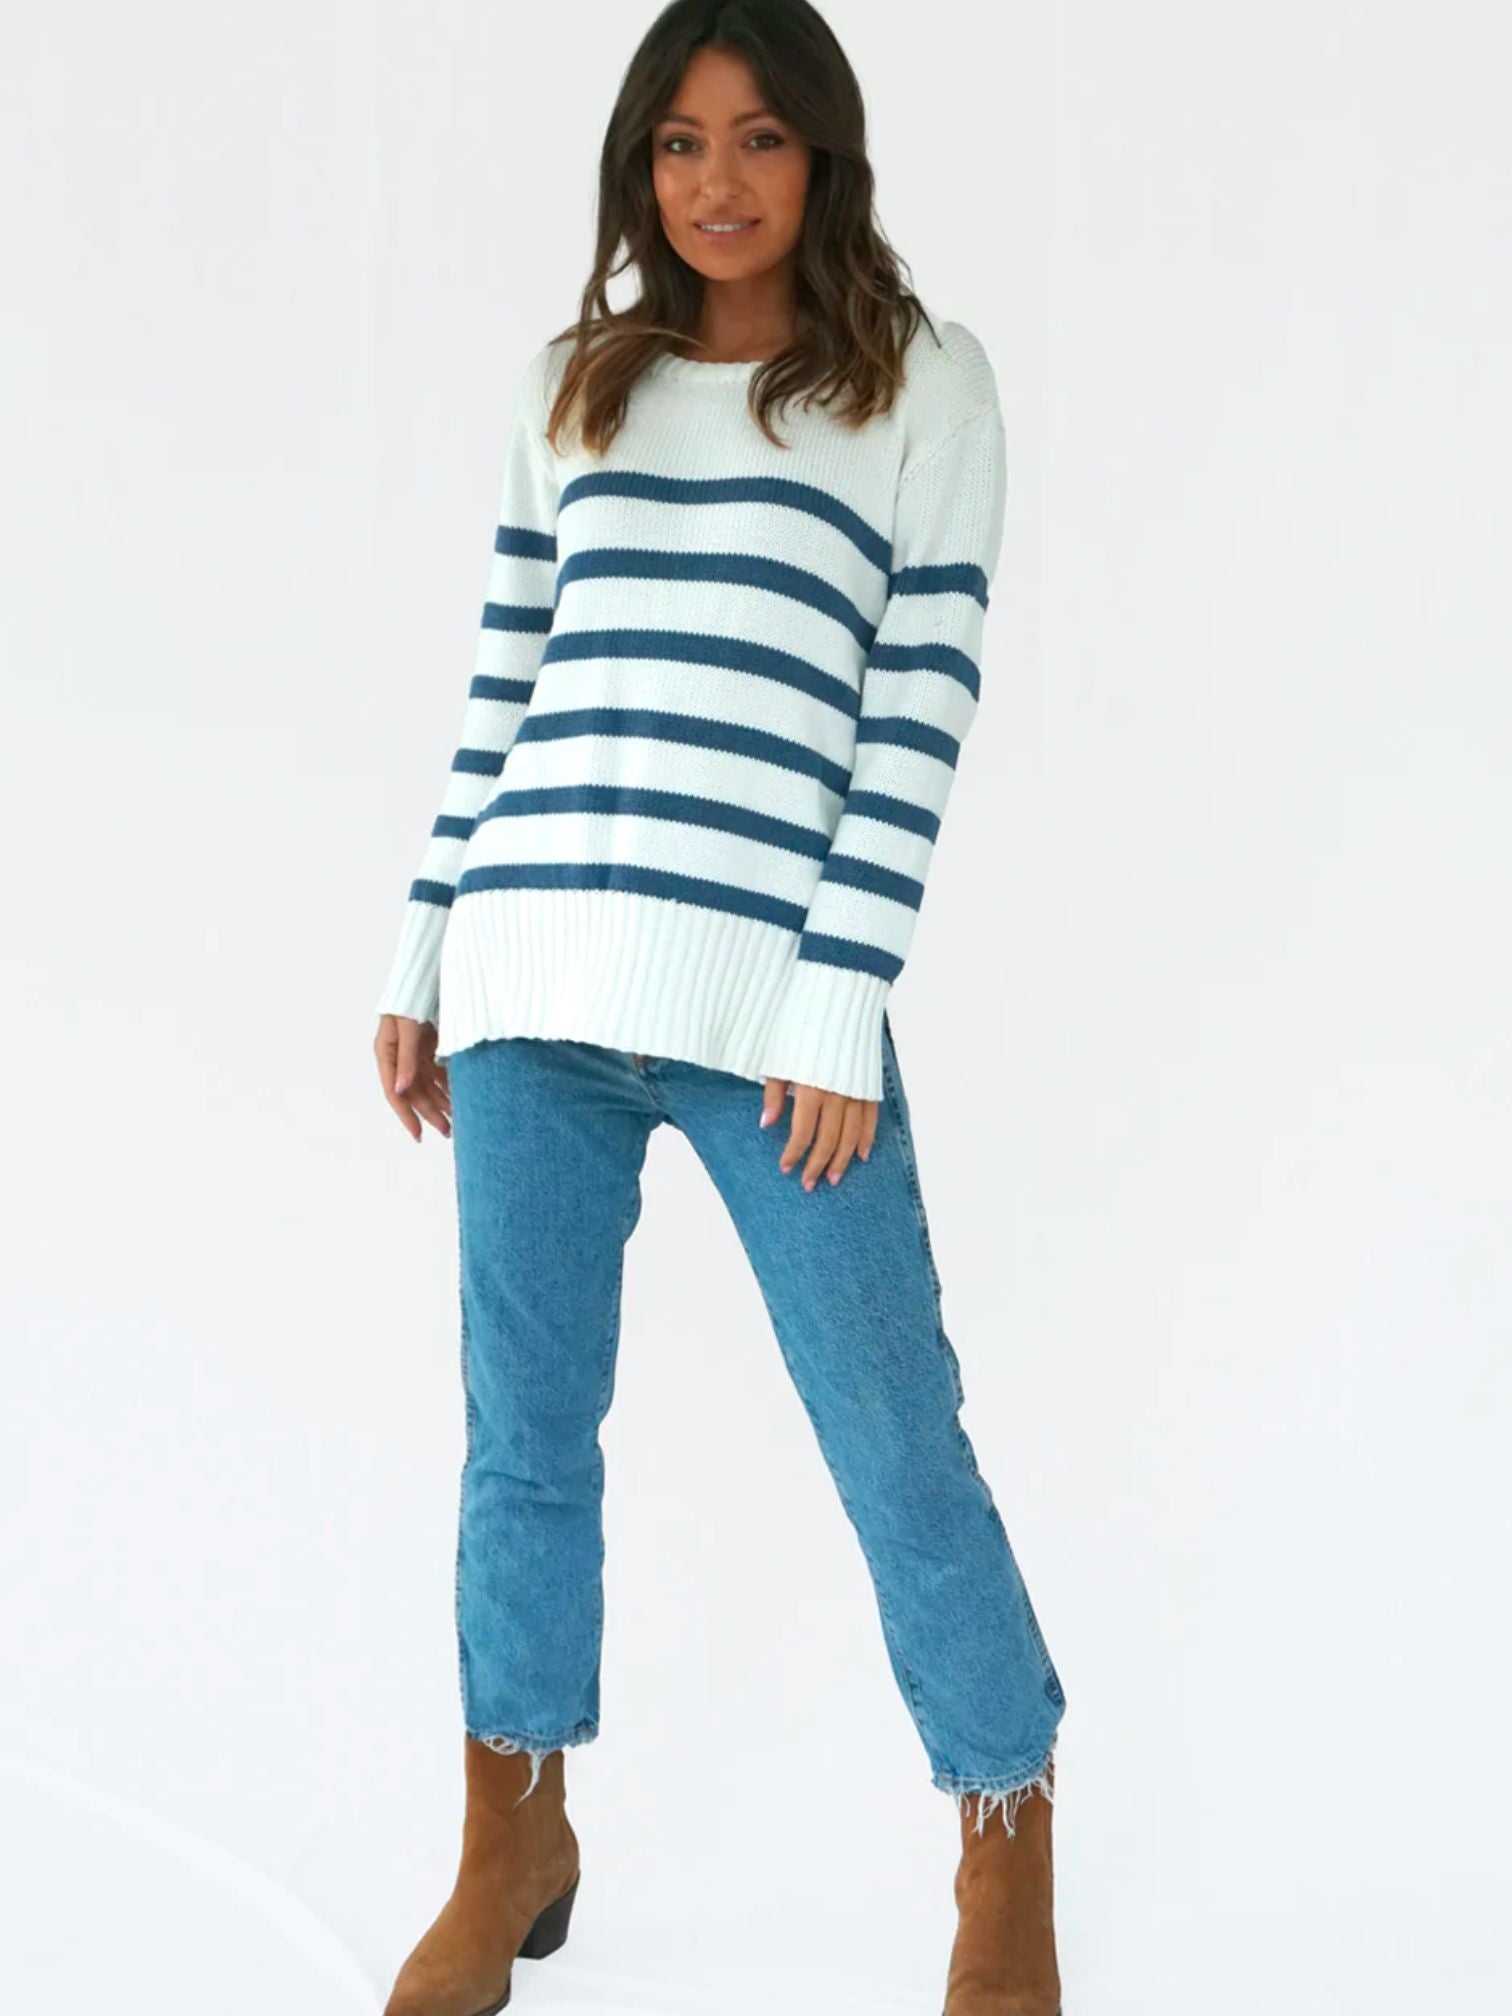 White sweater with blue horizontal stripes, spilt hem. Woman wearing weater with jeans and knee high brown boots